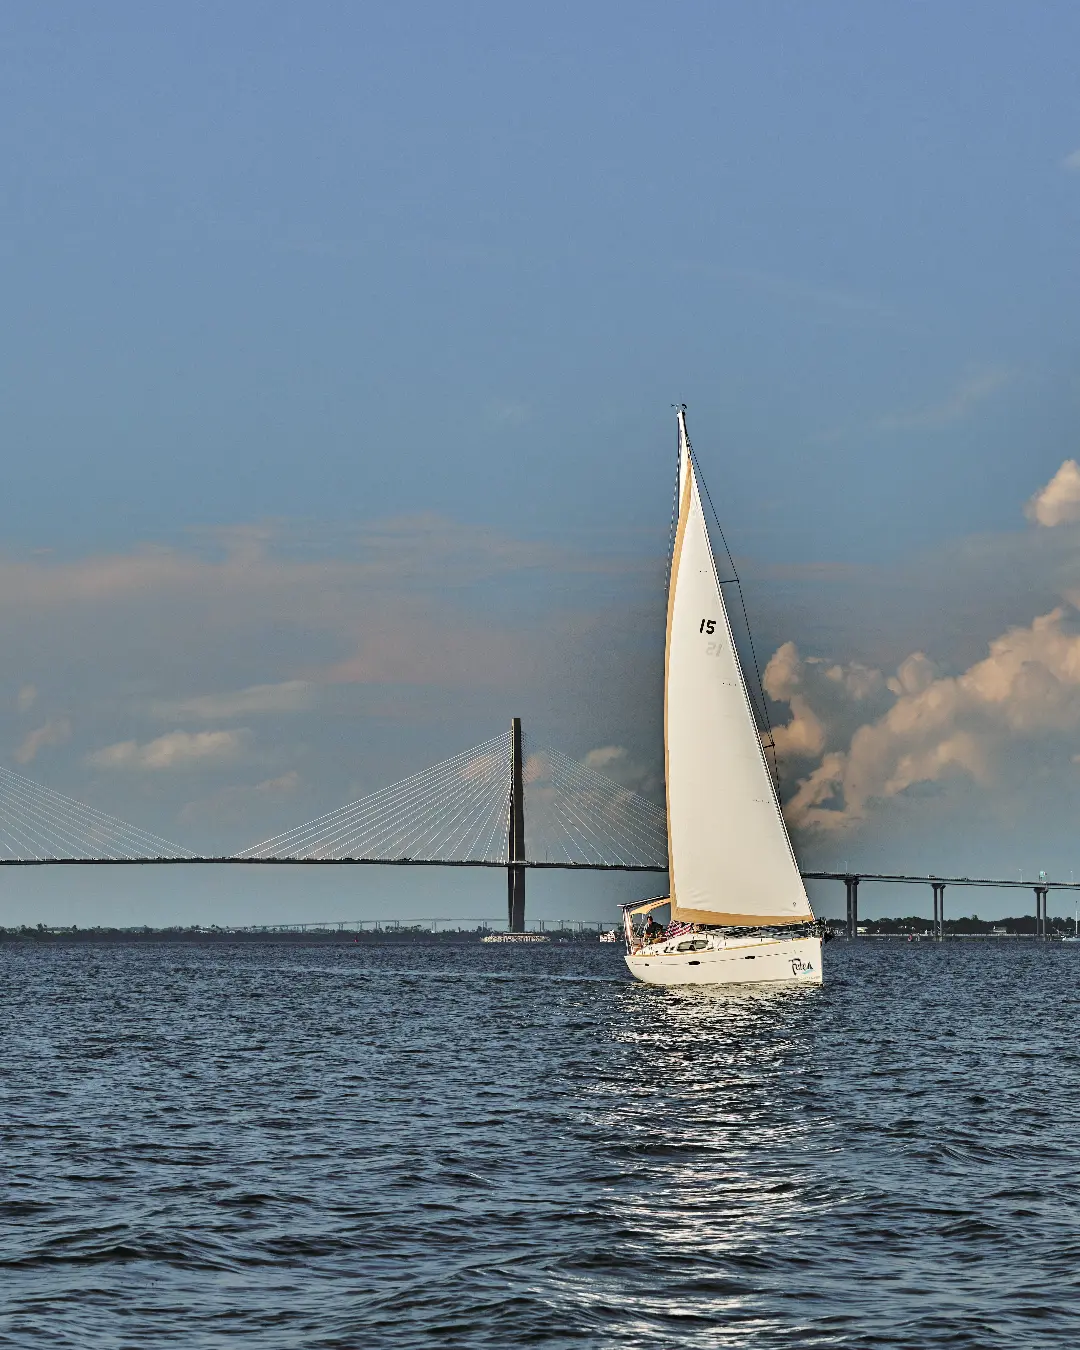 Serenely sailing amidst the endless ocean, a sailboat graces the scene, accompanied by a picturesque bridge in the distance.